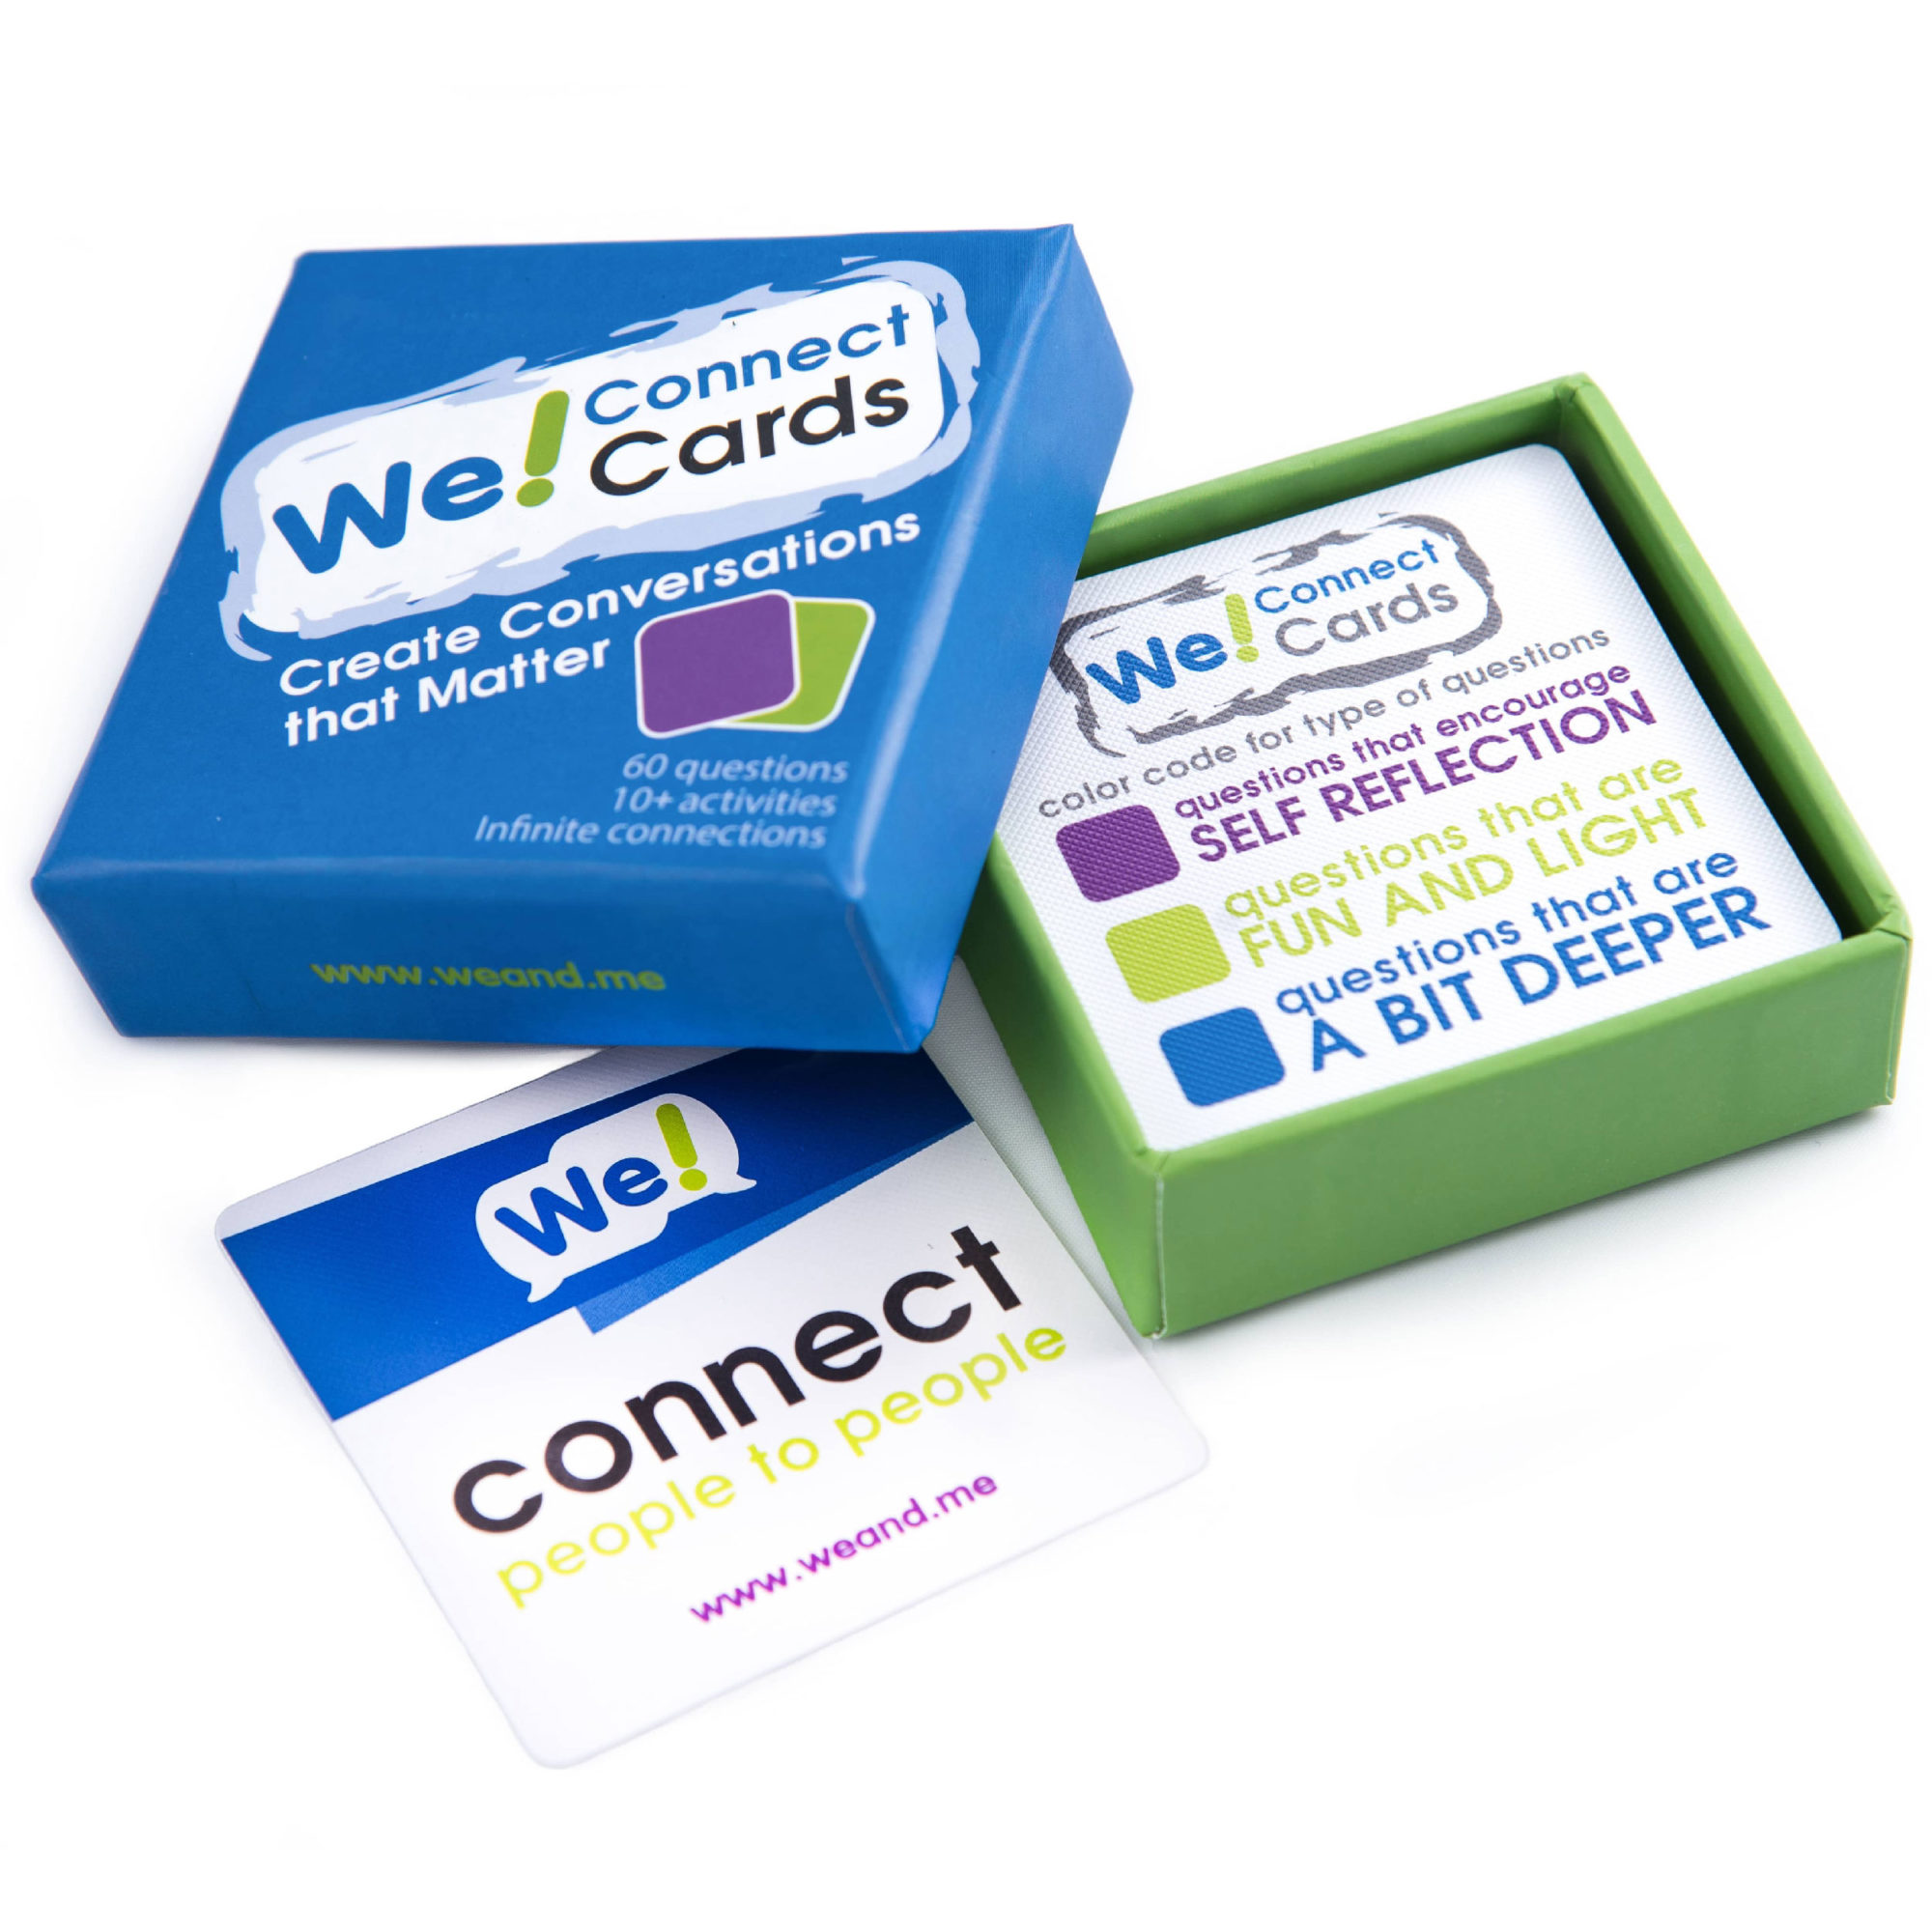 We connect. Connect Cards™. Connect карта